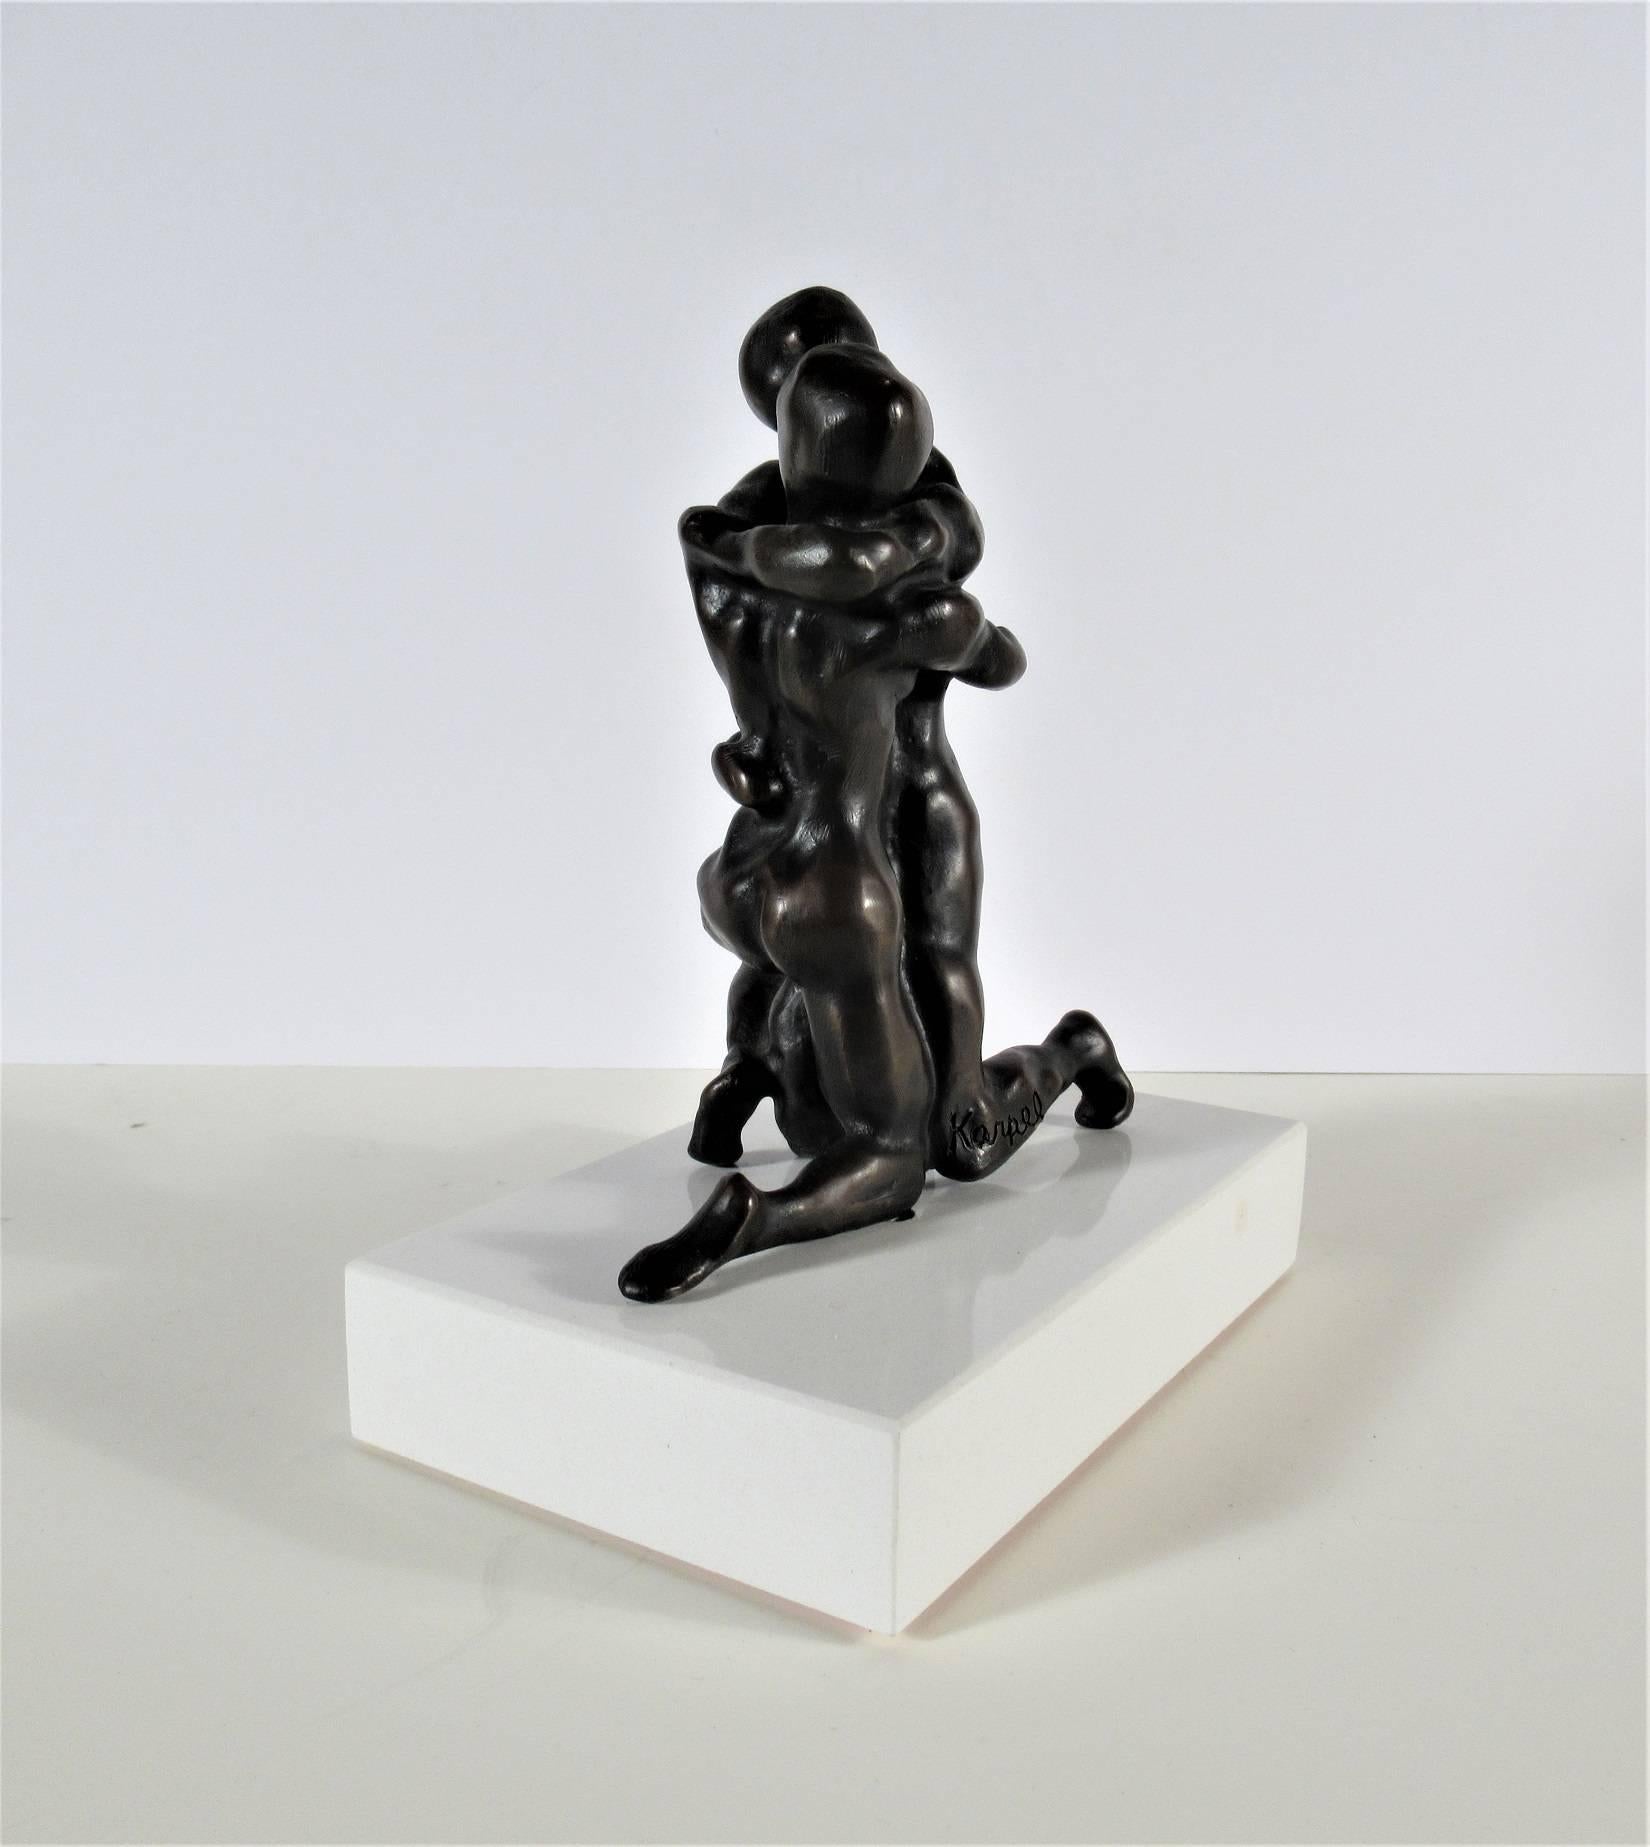 Two Lovers, Couple Embracing - Sculpture by Eli Karpel